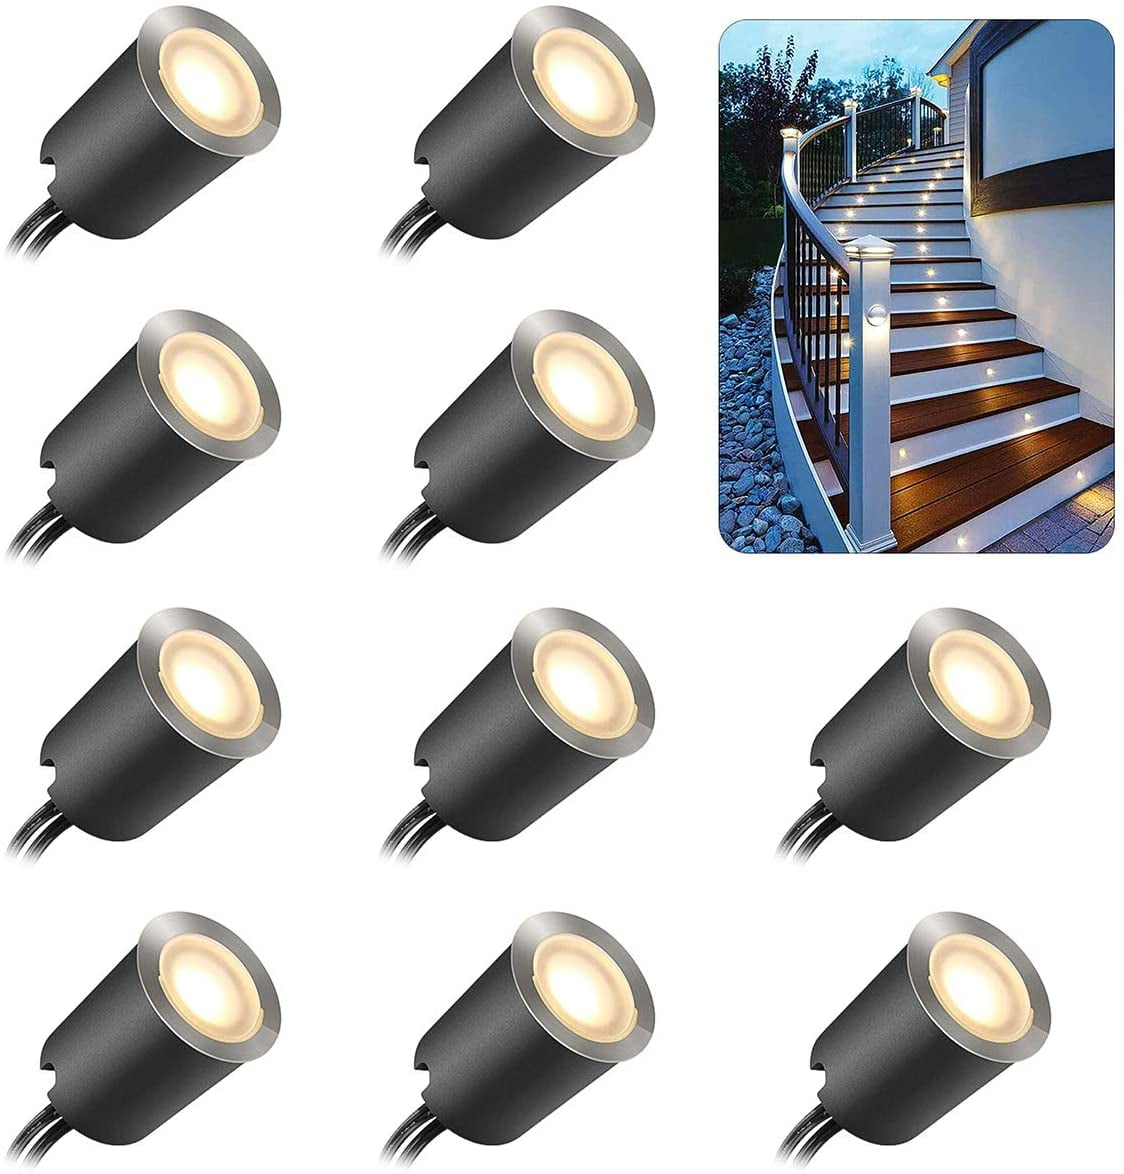 In Ground Outdoor LED Deck Lighting Waterproof IP67,Low Voltage LED Lights for Garden,Yard Steps,Stair,Patio,Pool Deck,Kitchen Decoration Upgrade Version Recessed LED Deck Lights Kits 6 Pack,SMY 